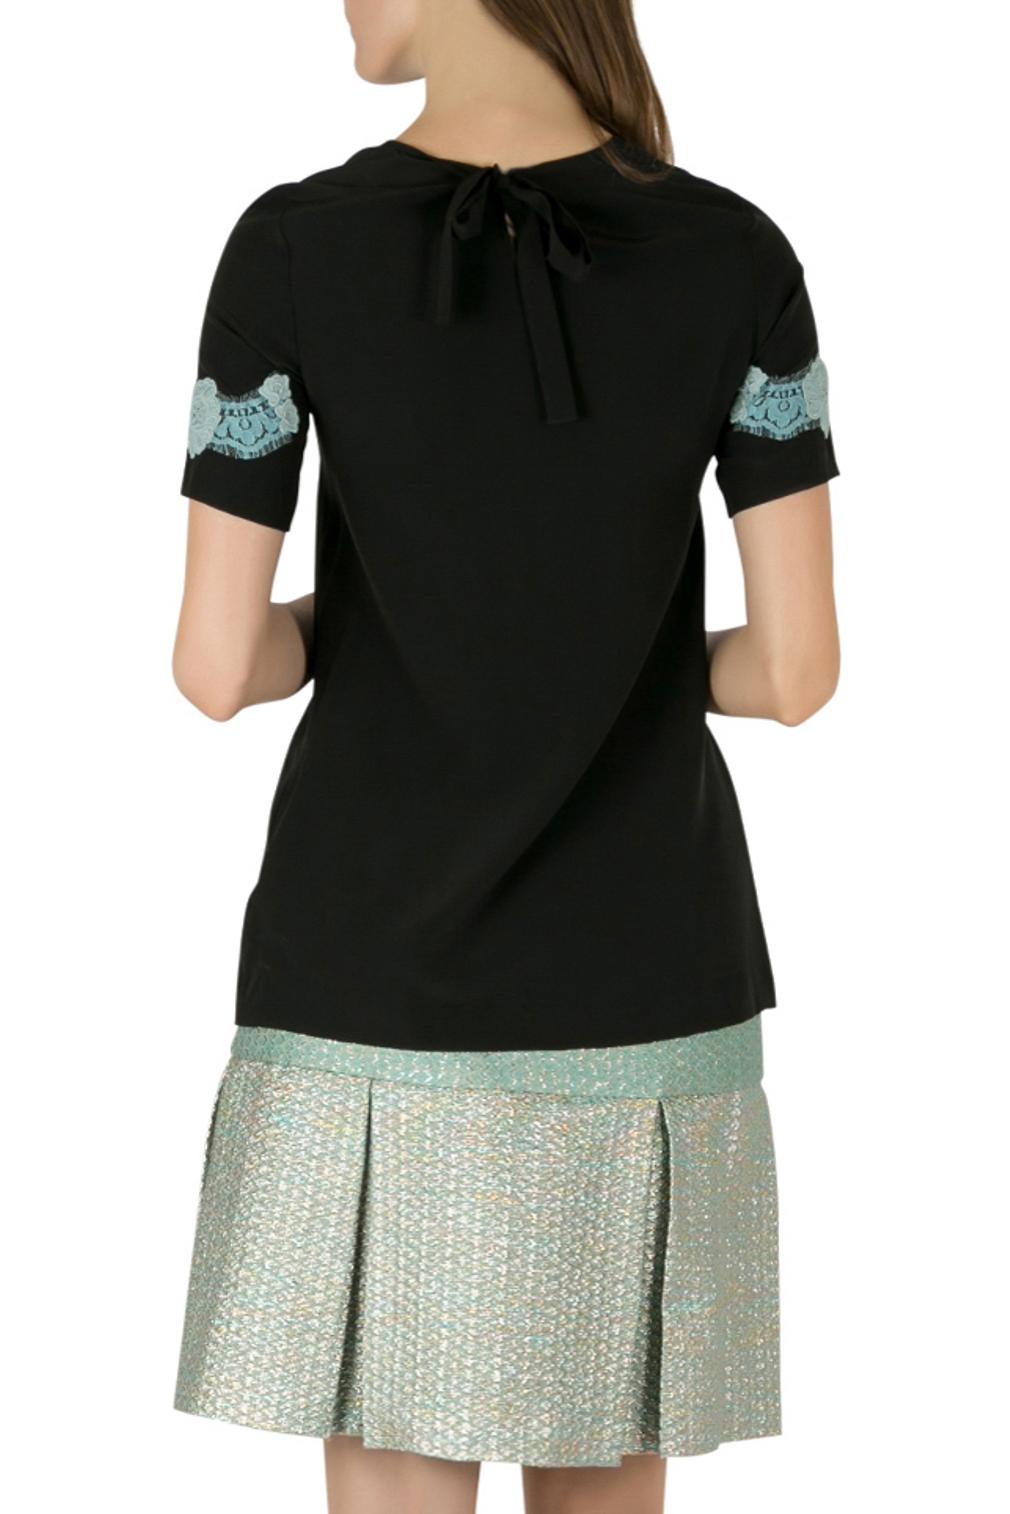 Tailored from smooth silk fabric, the short sleeve blouse features beautiful floral lace applique detail in a contrasting color. The creation will go well with complementing skirt and flats. Add this black Dolce & Gabbana blouse to your collection